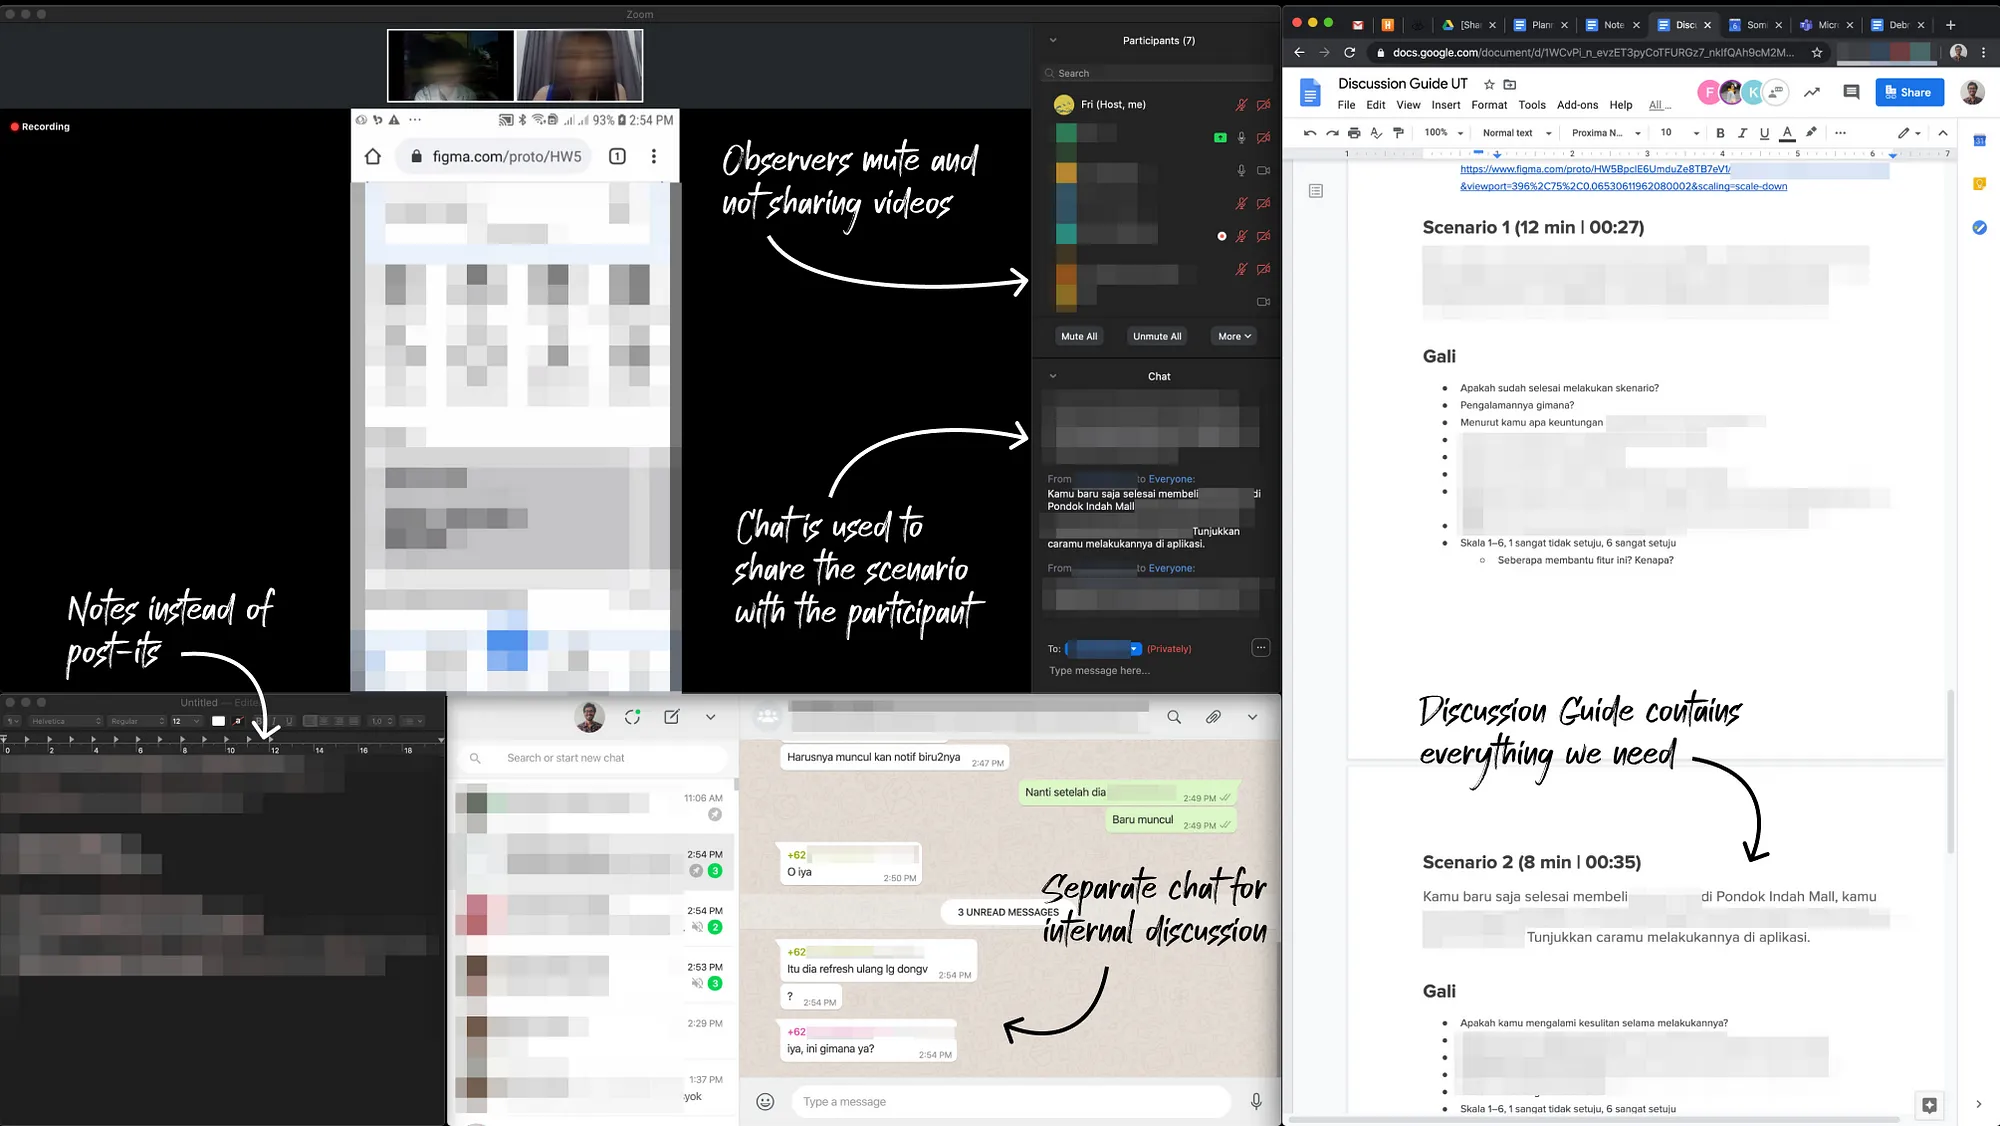 My screen setup during remote usability testing session: TOP-LEFT is the call app with participant list control open for easy access to muting unwanted voice and private chat open for sharing links and scenarios with the participant; BOTTOM-LEFT for note-taking; BOTTOM-MIDDLE for chat for internal discussion with observer; RIGHT is the discussion-guide